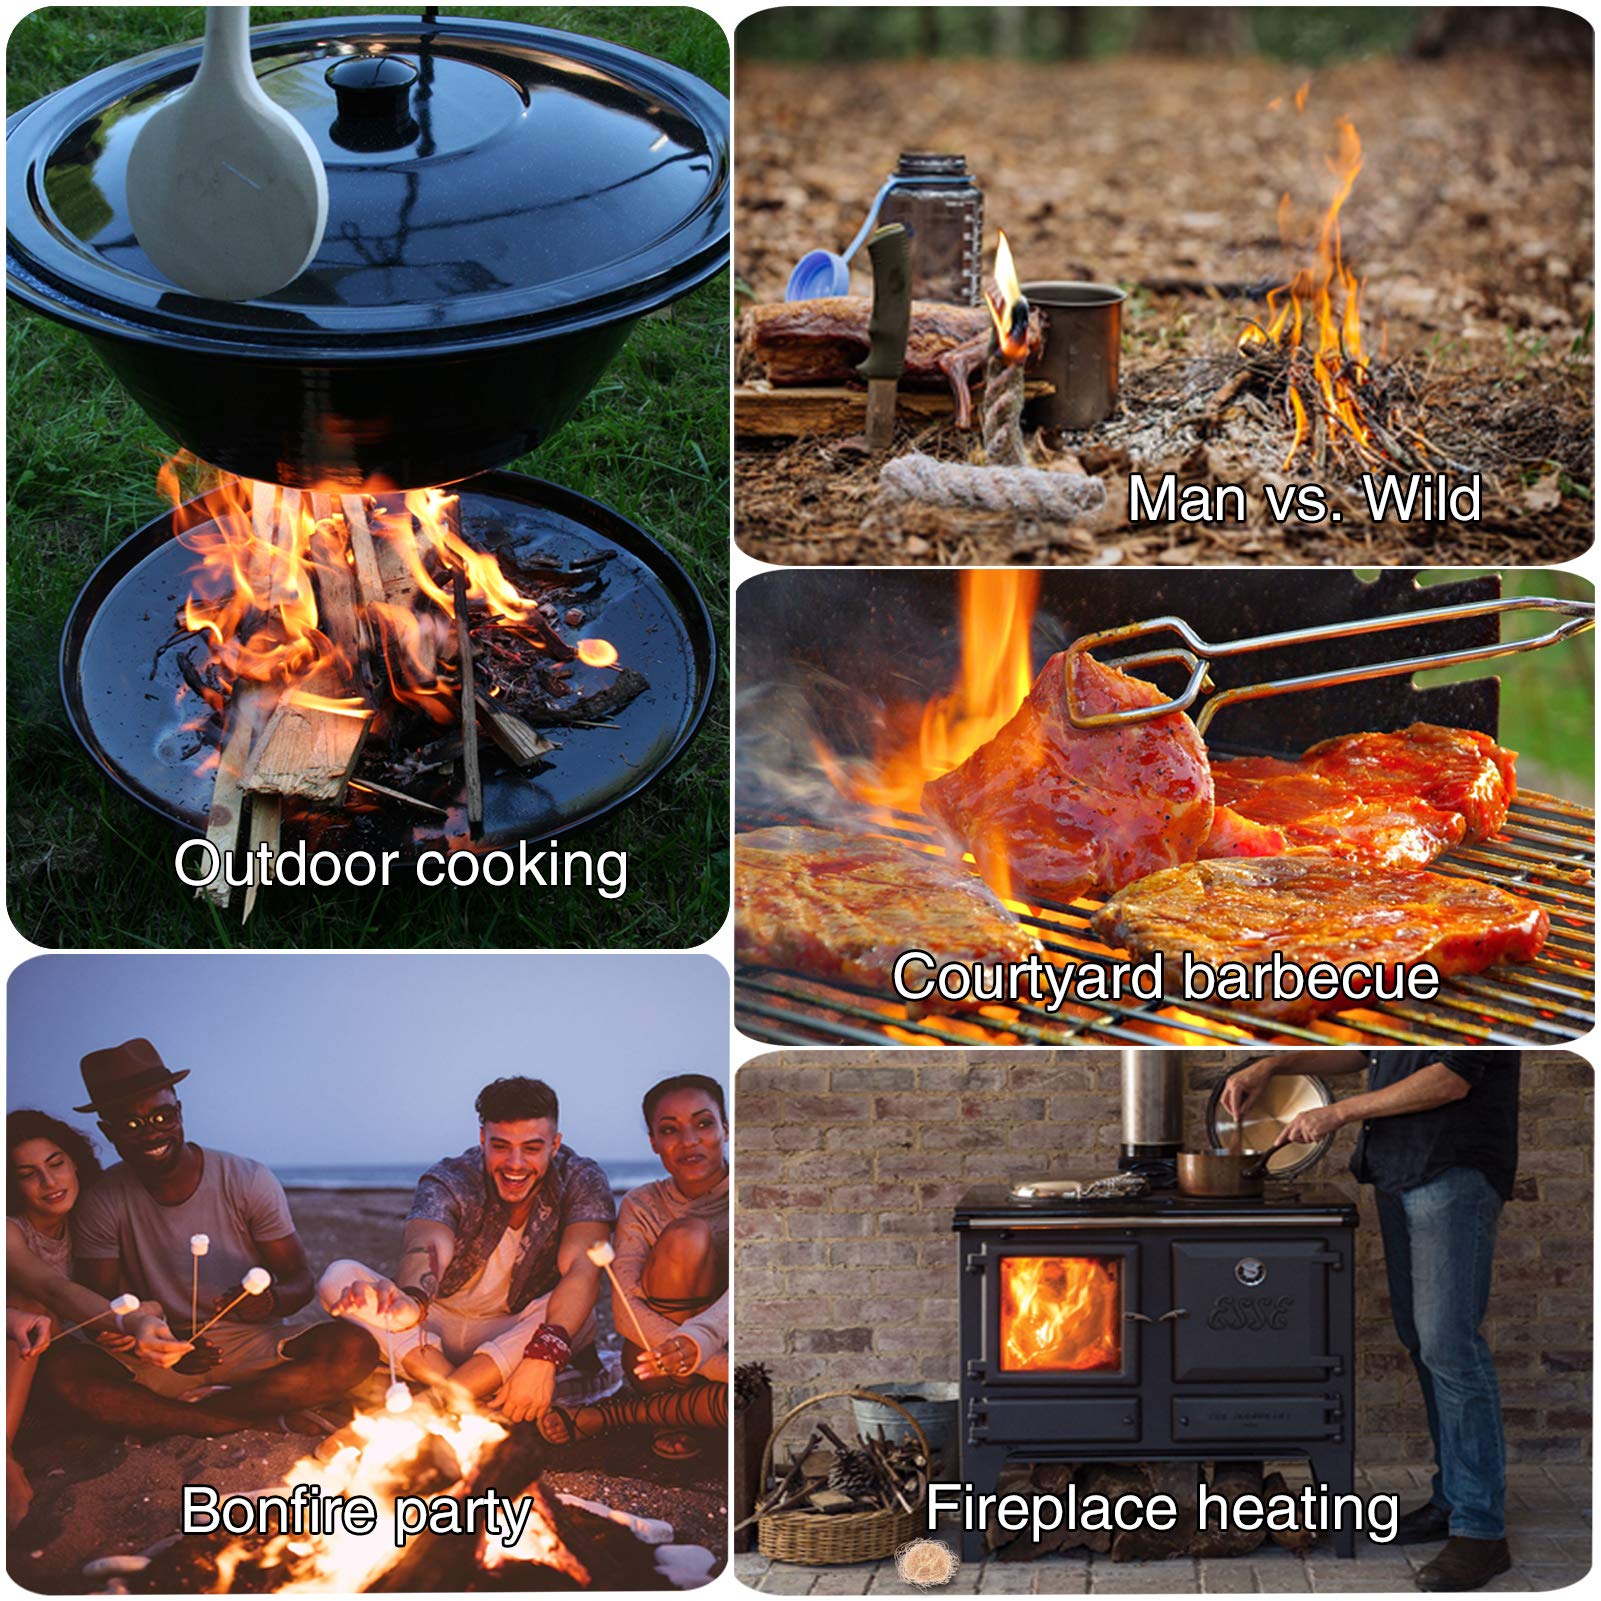 GOLDACE100% Windproof, Rainproof and Moisture- Emergency Surviva Kits| Long-Lasting Fire Starters for Campfires| Camping Cooking Kindling Tinder| fire Rope Hemp core| Unlimited Shelf Life